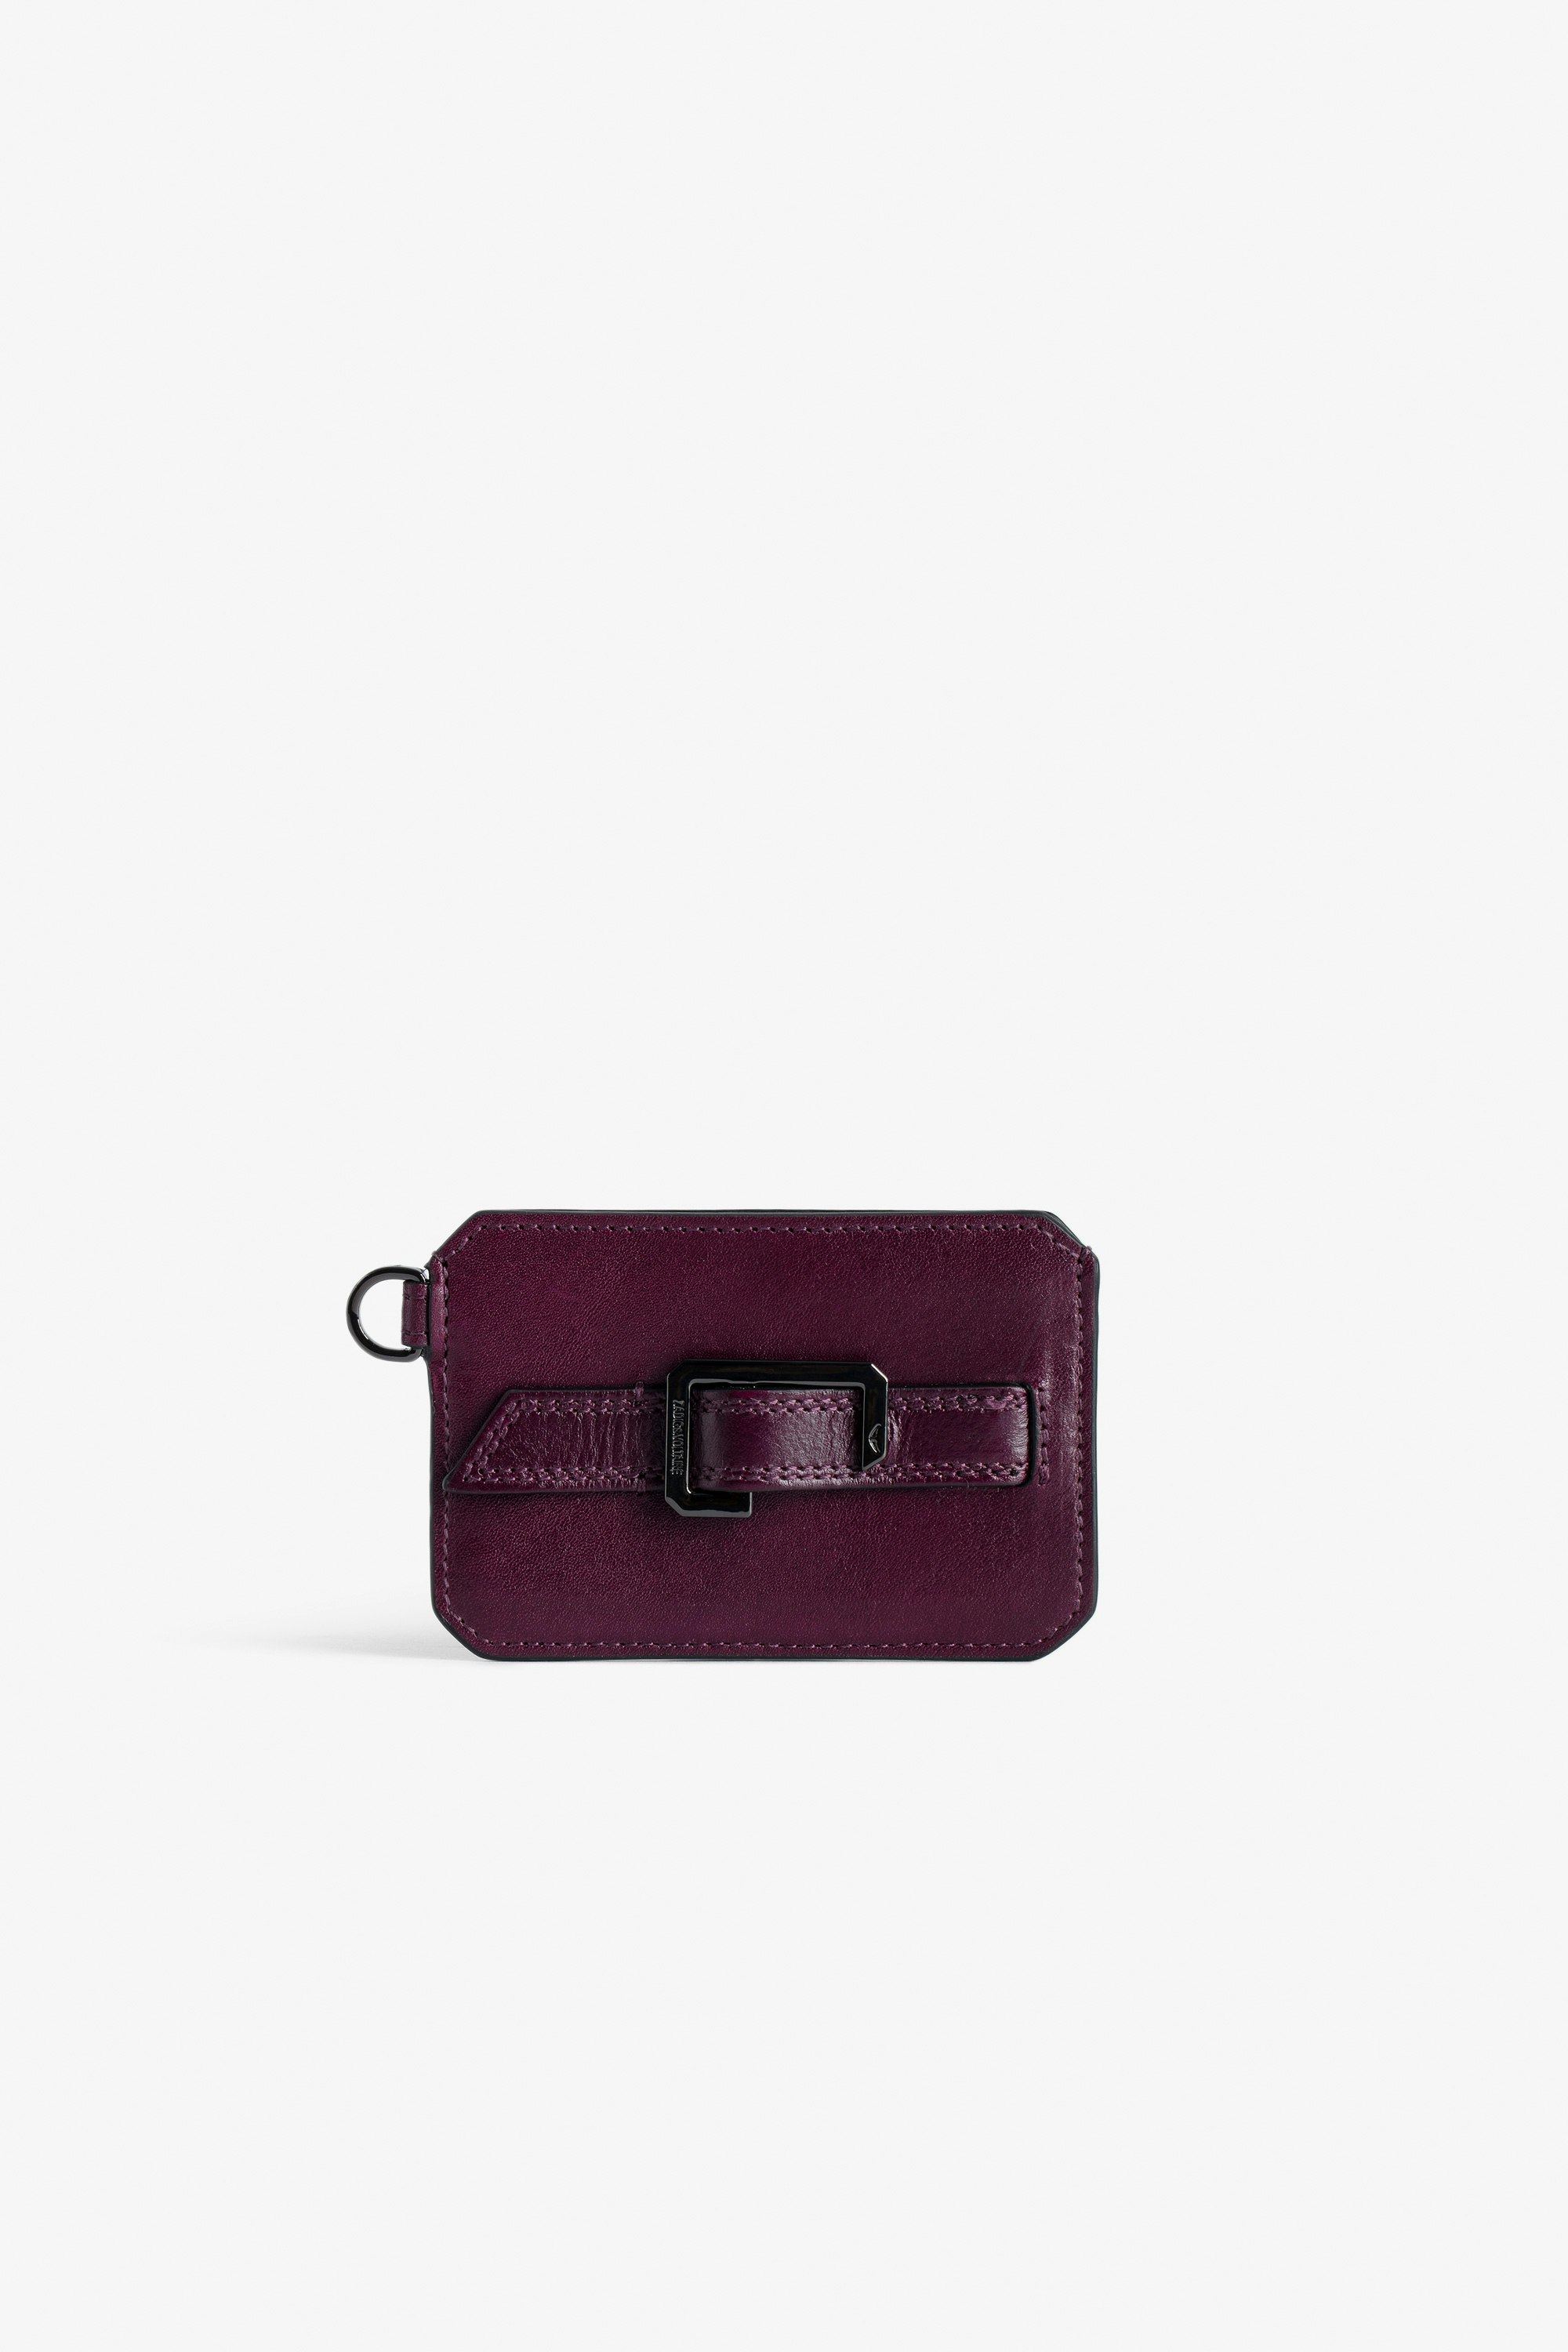 Le Cecilia Pass Card Holder - Women’s burgundy leather card holder with C buckle.